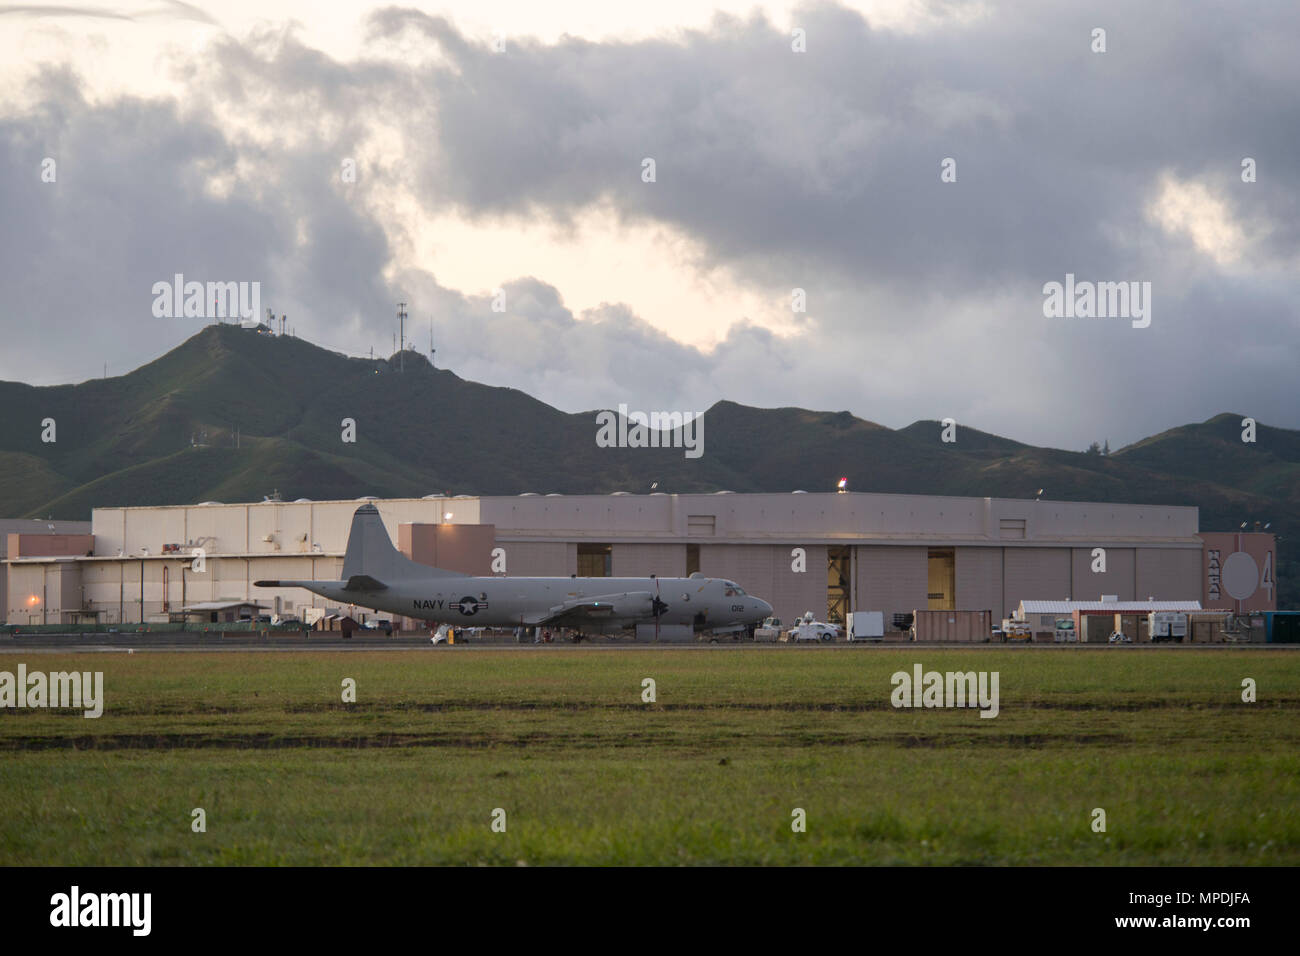 170303-N-YW024-006 KANEOHE BAY, HAWAII (Mar. 3, 2017) A P-3 Orion, assigned to Patrol Squadron Nine (VP-9) Golden Eagles, takes off during a command disestablishment at Marine Corps Base Hawaii. The VP-9  squadron was leaving for a scheduled deployment, to be followed by a homeport shift to Naval Air Station Whidbey Island in Washington. The P-3 Orion is a four-engine turboprop anti-submarine and maritime surveillance aircraft developed by the U.S. Navy in the 1960s. (U.S. Navy photo by Mass Communication Specialist 2nd Class Katarzyna Kobiljak) Stock Photo